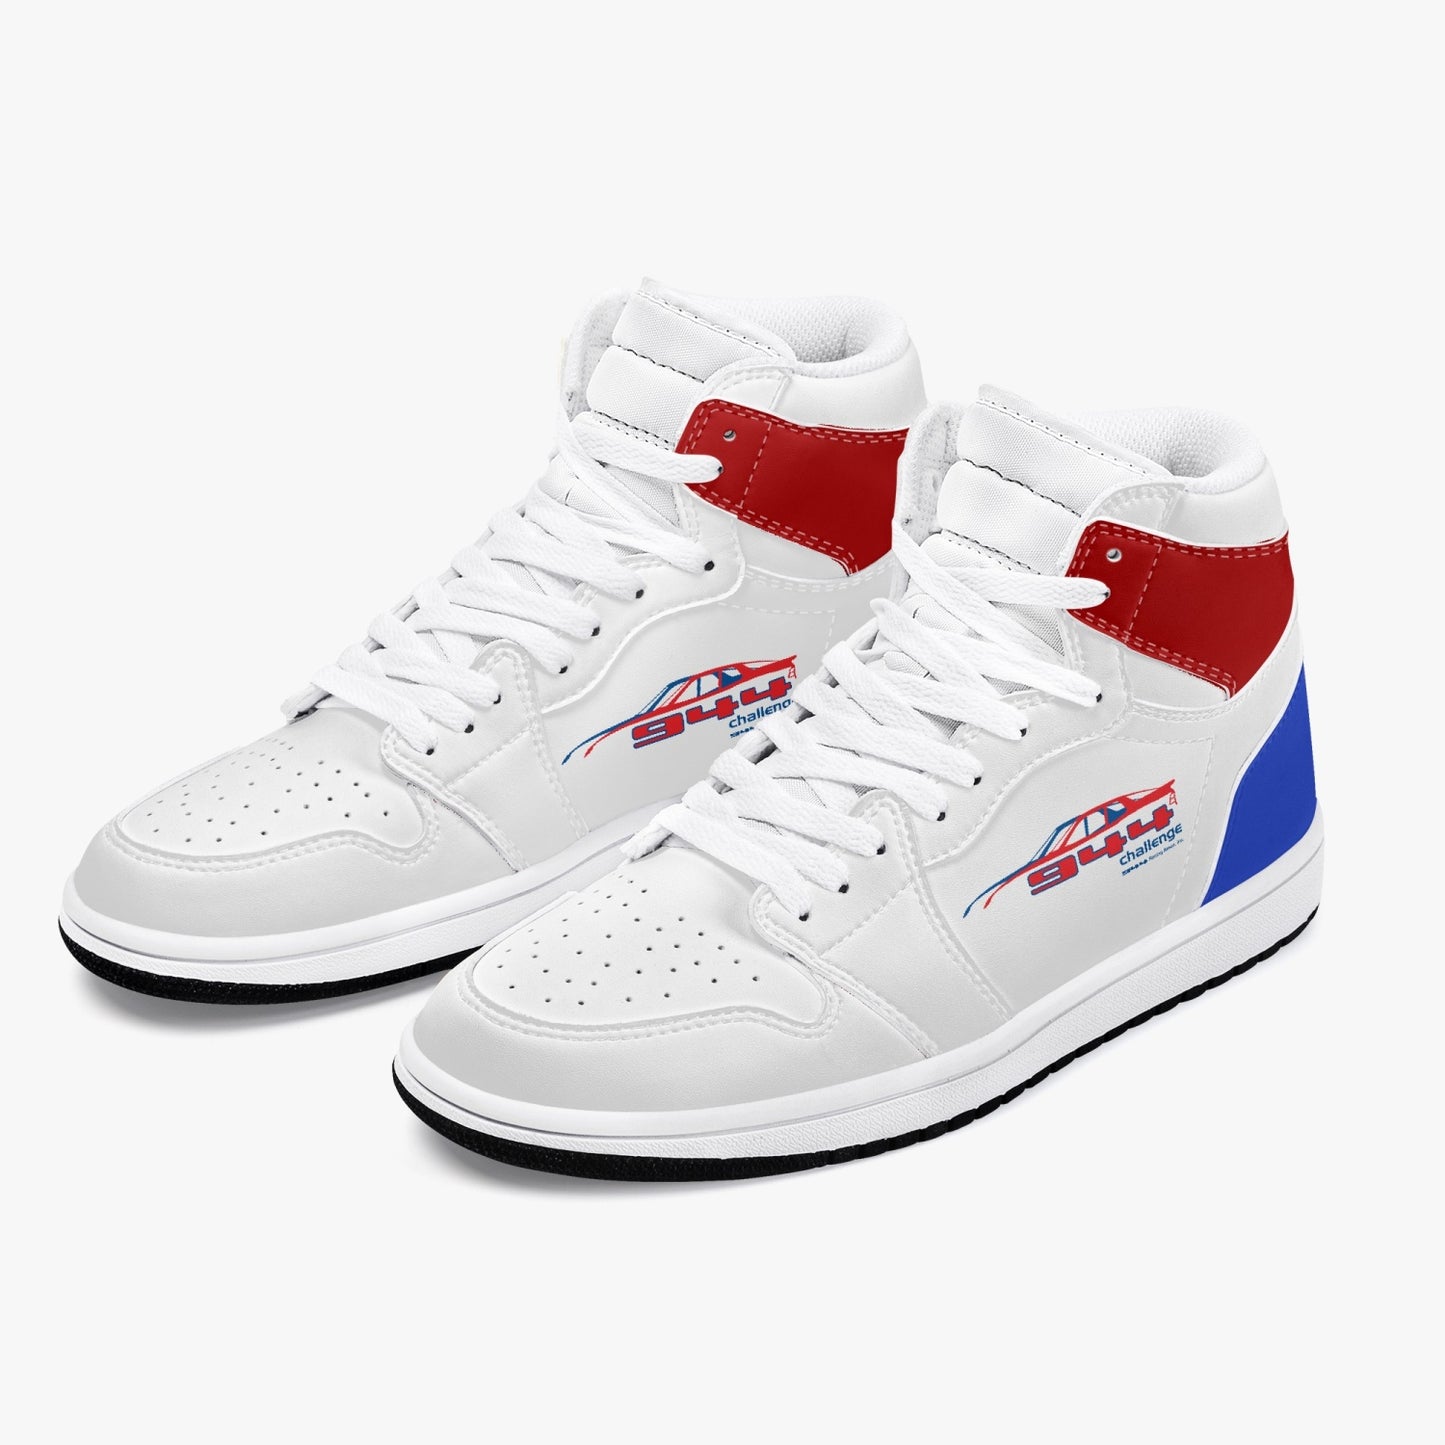 944 Challenge Series Australia official leather sneaker - 944 series colours